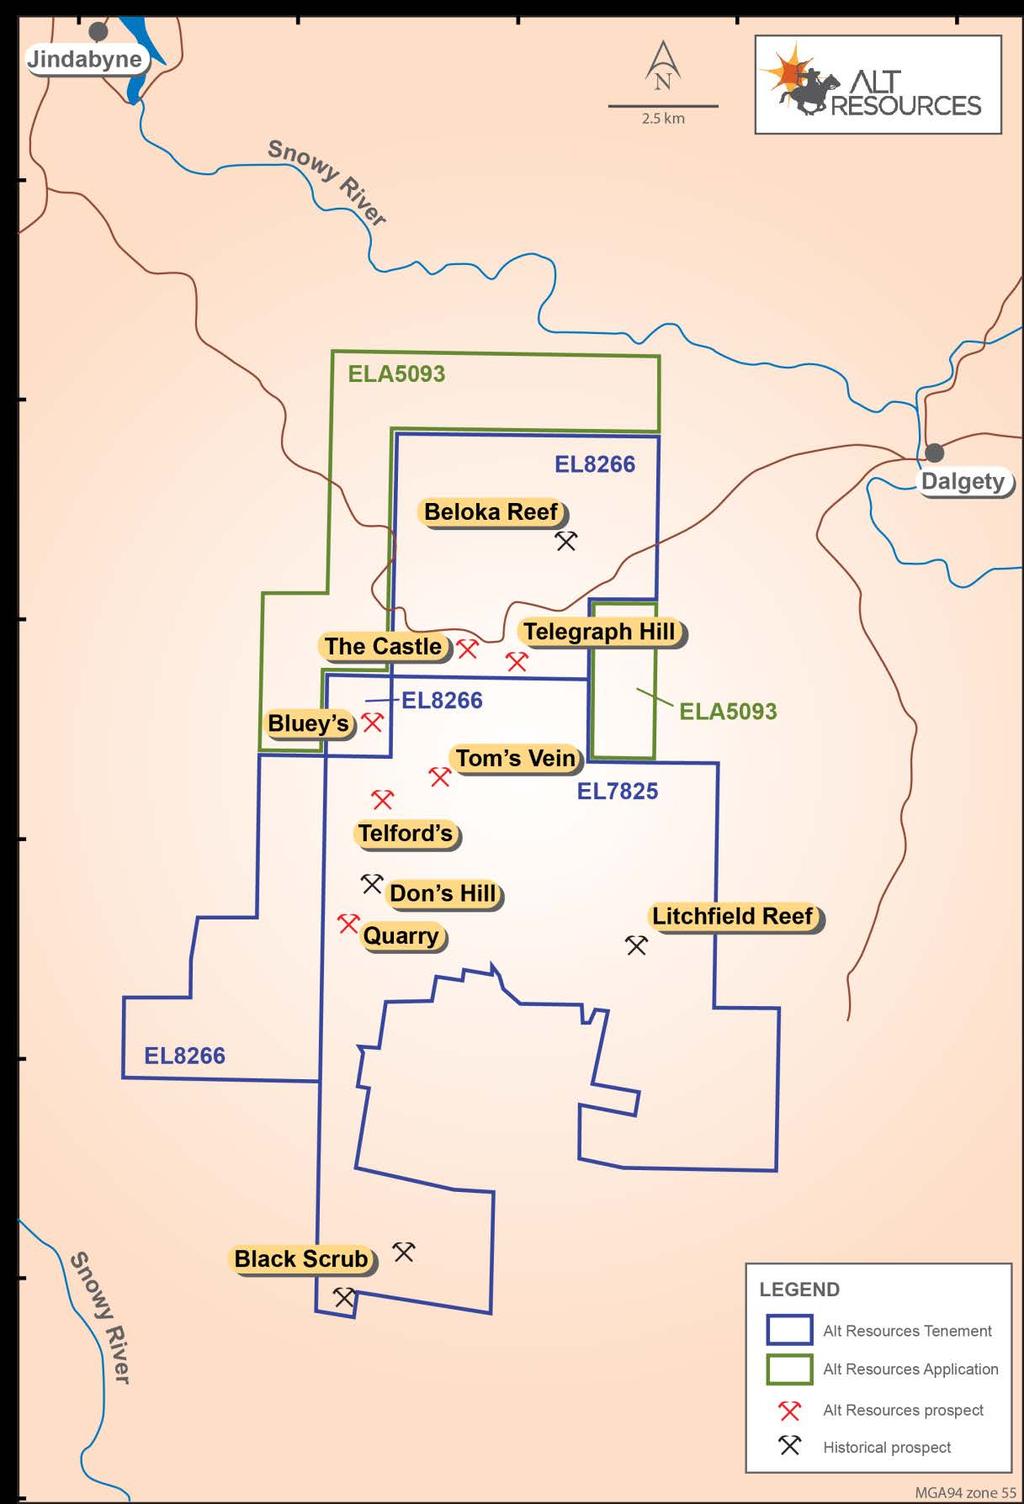 Exploration Pty Ltd (GFM), is being explored as a joint venture (The JV) with Alt Resources Ltd, which is currently seeking listing on the ASX through an